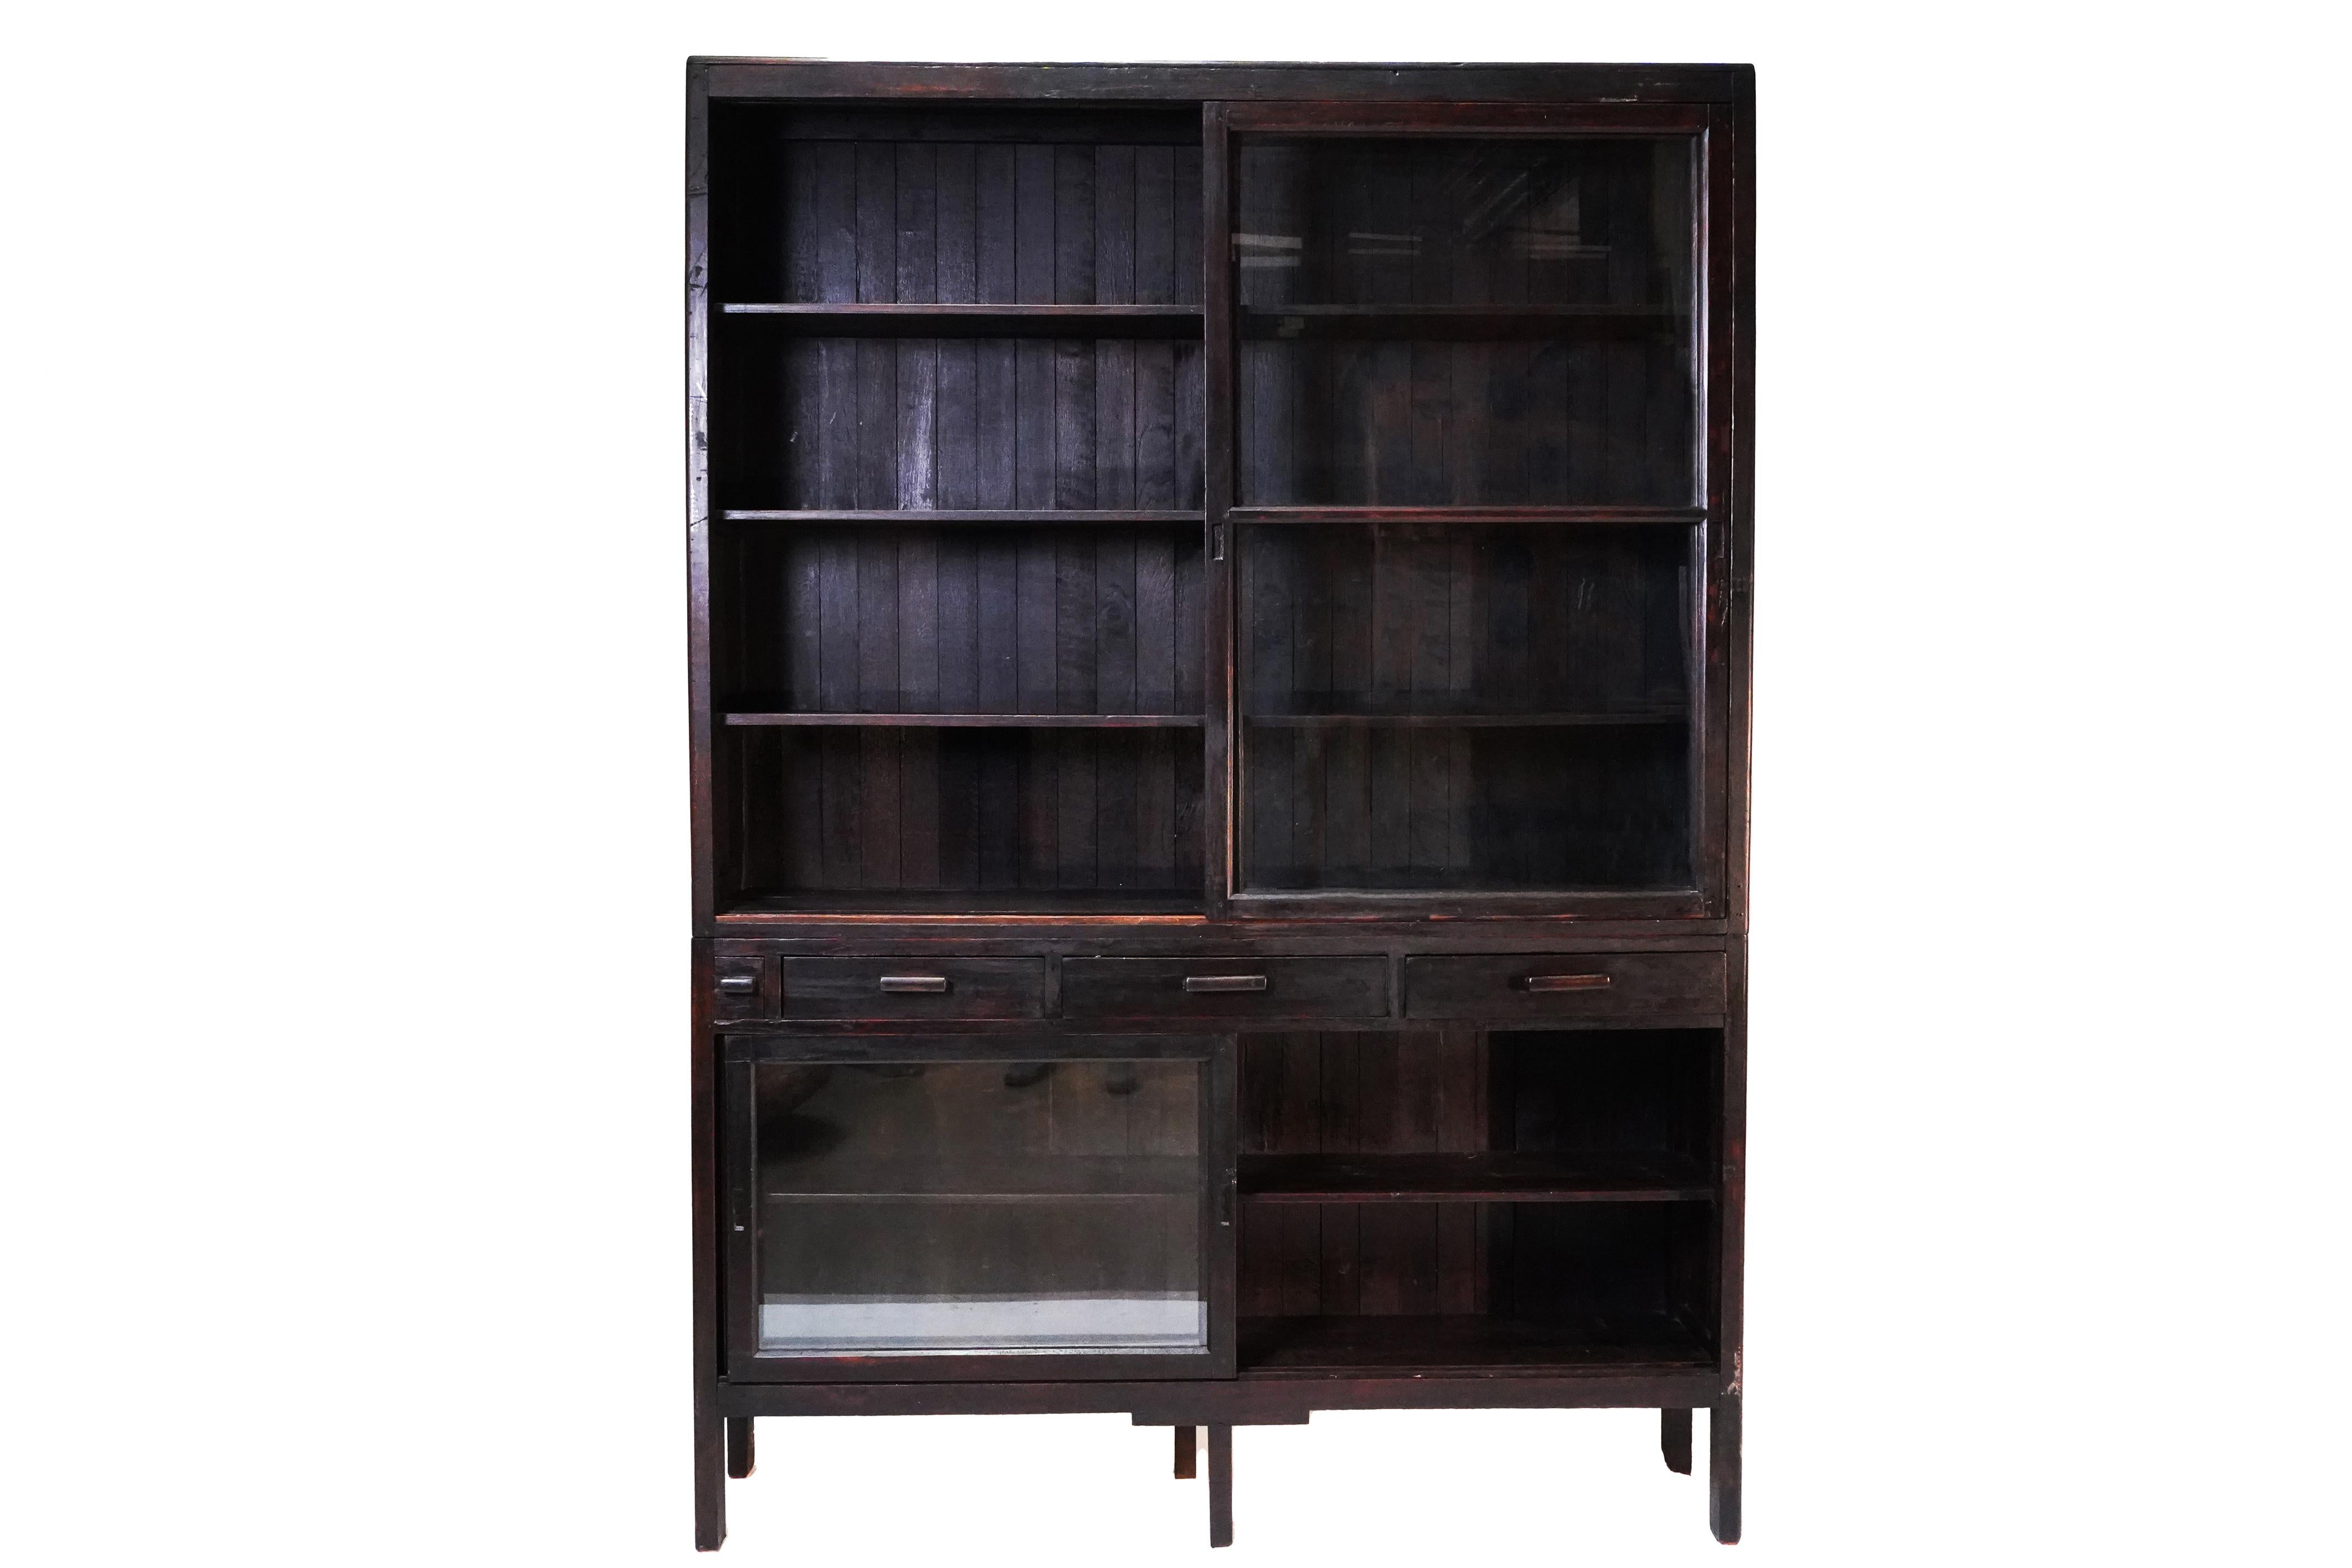 This solid teak bookcase was made in a modern, simple style in Rangoon, Burma, near the very end of the British Empire.   We call these pieces by different names; 